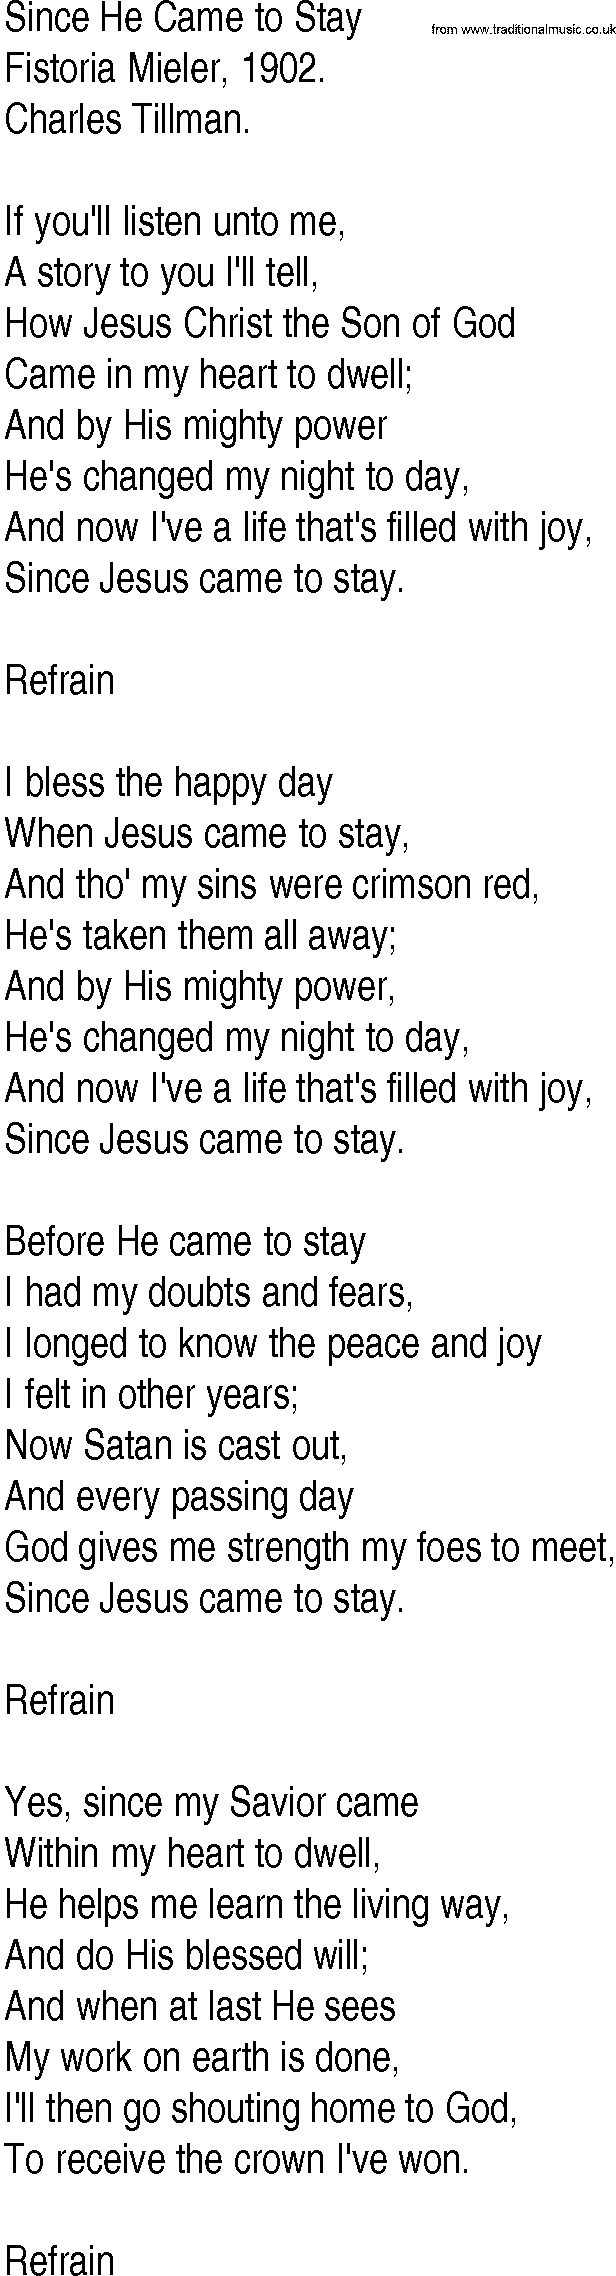 Hymn and Gospel Song: Since He Came to Stay by Fistoria Mieler lyrics